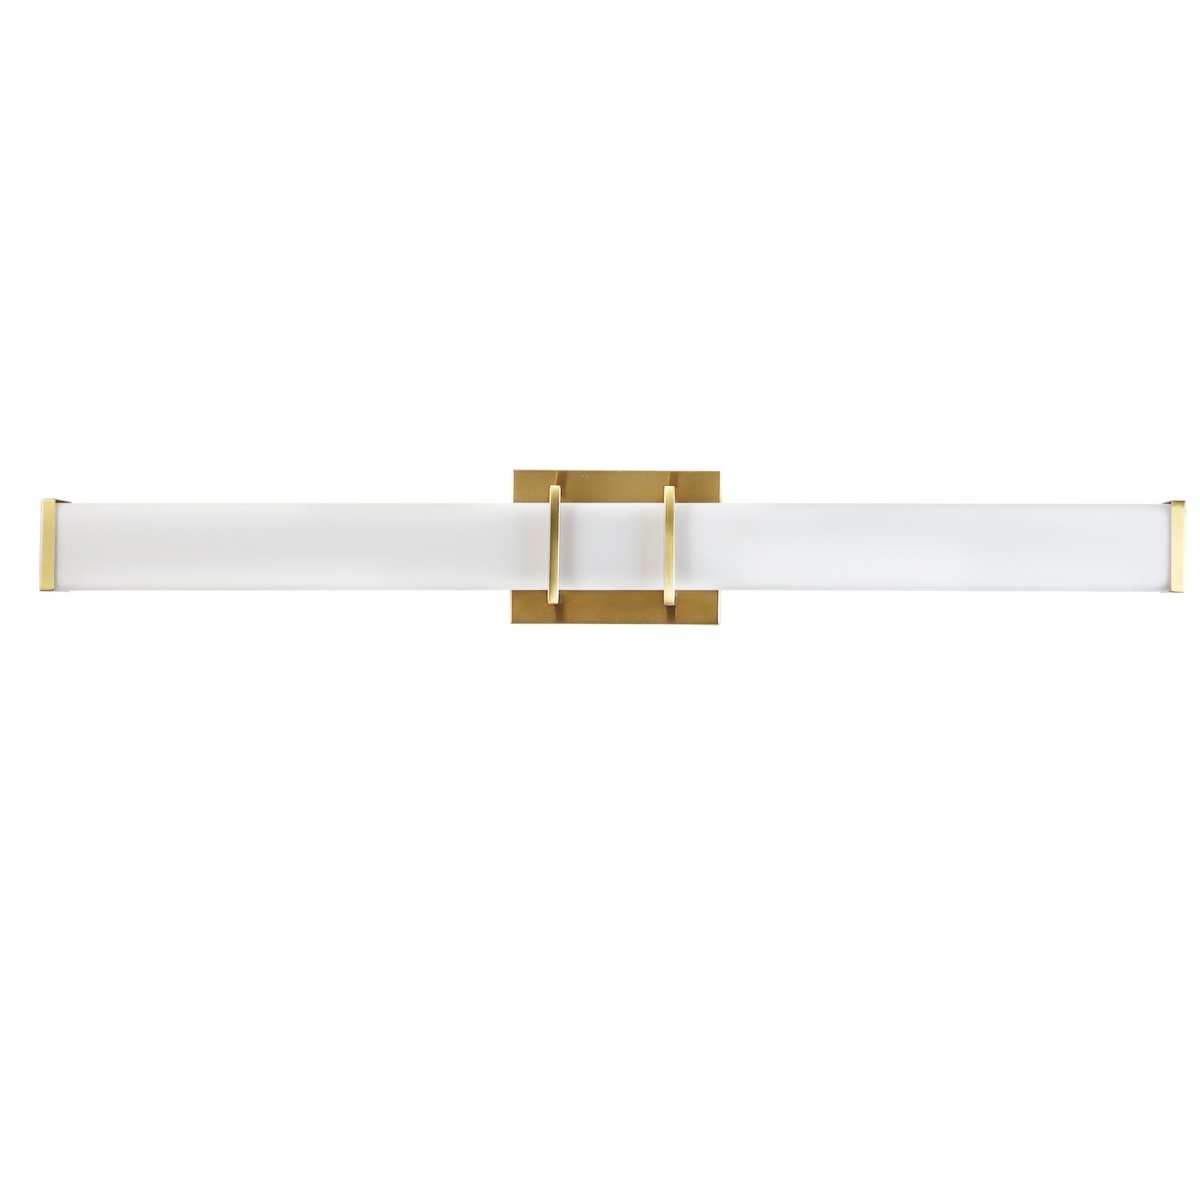 ExBrite 31.5" Sleek LED Vanity Light with Glass Shade, Tri-Color Temperature and Stepless Dimming, ETL-Certified, Gold